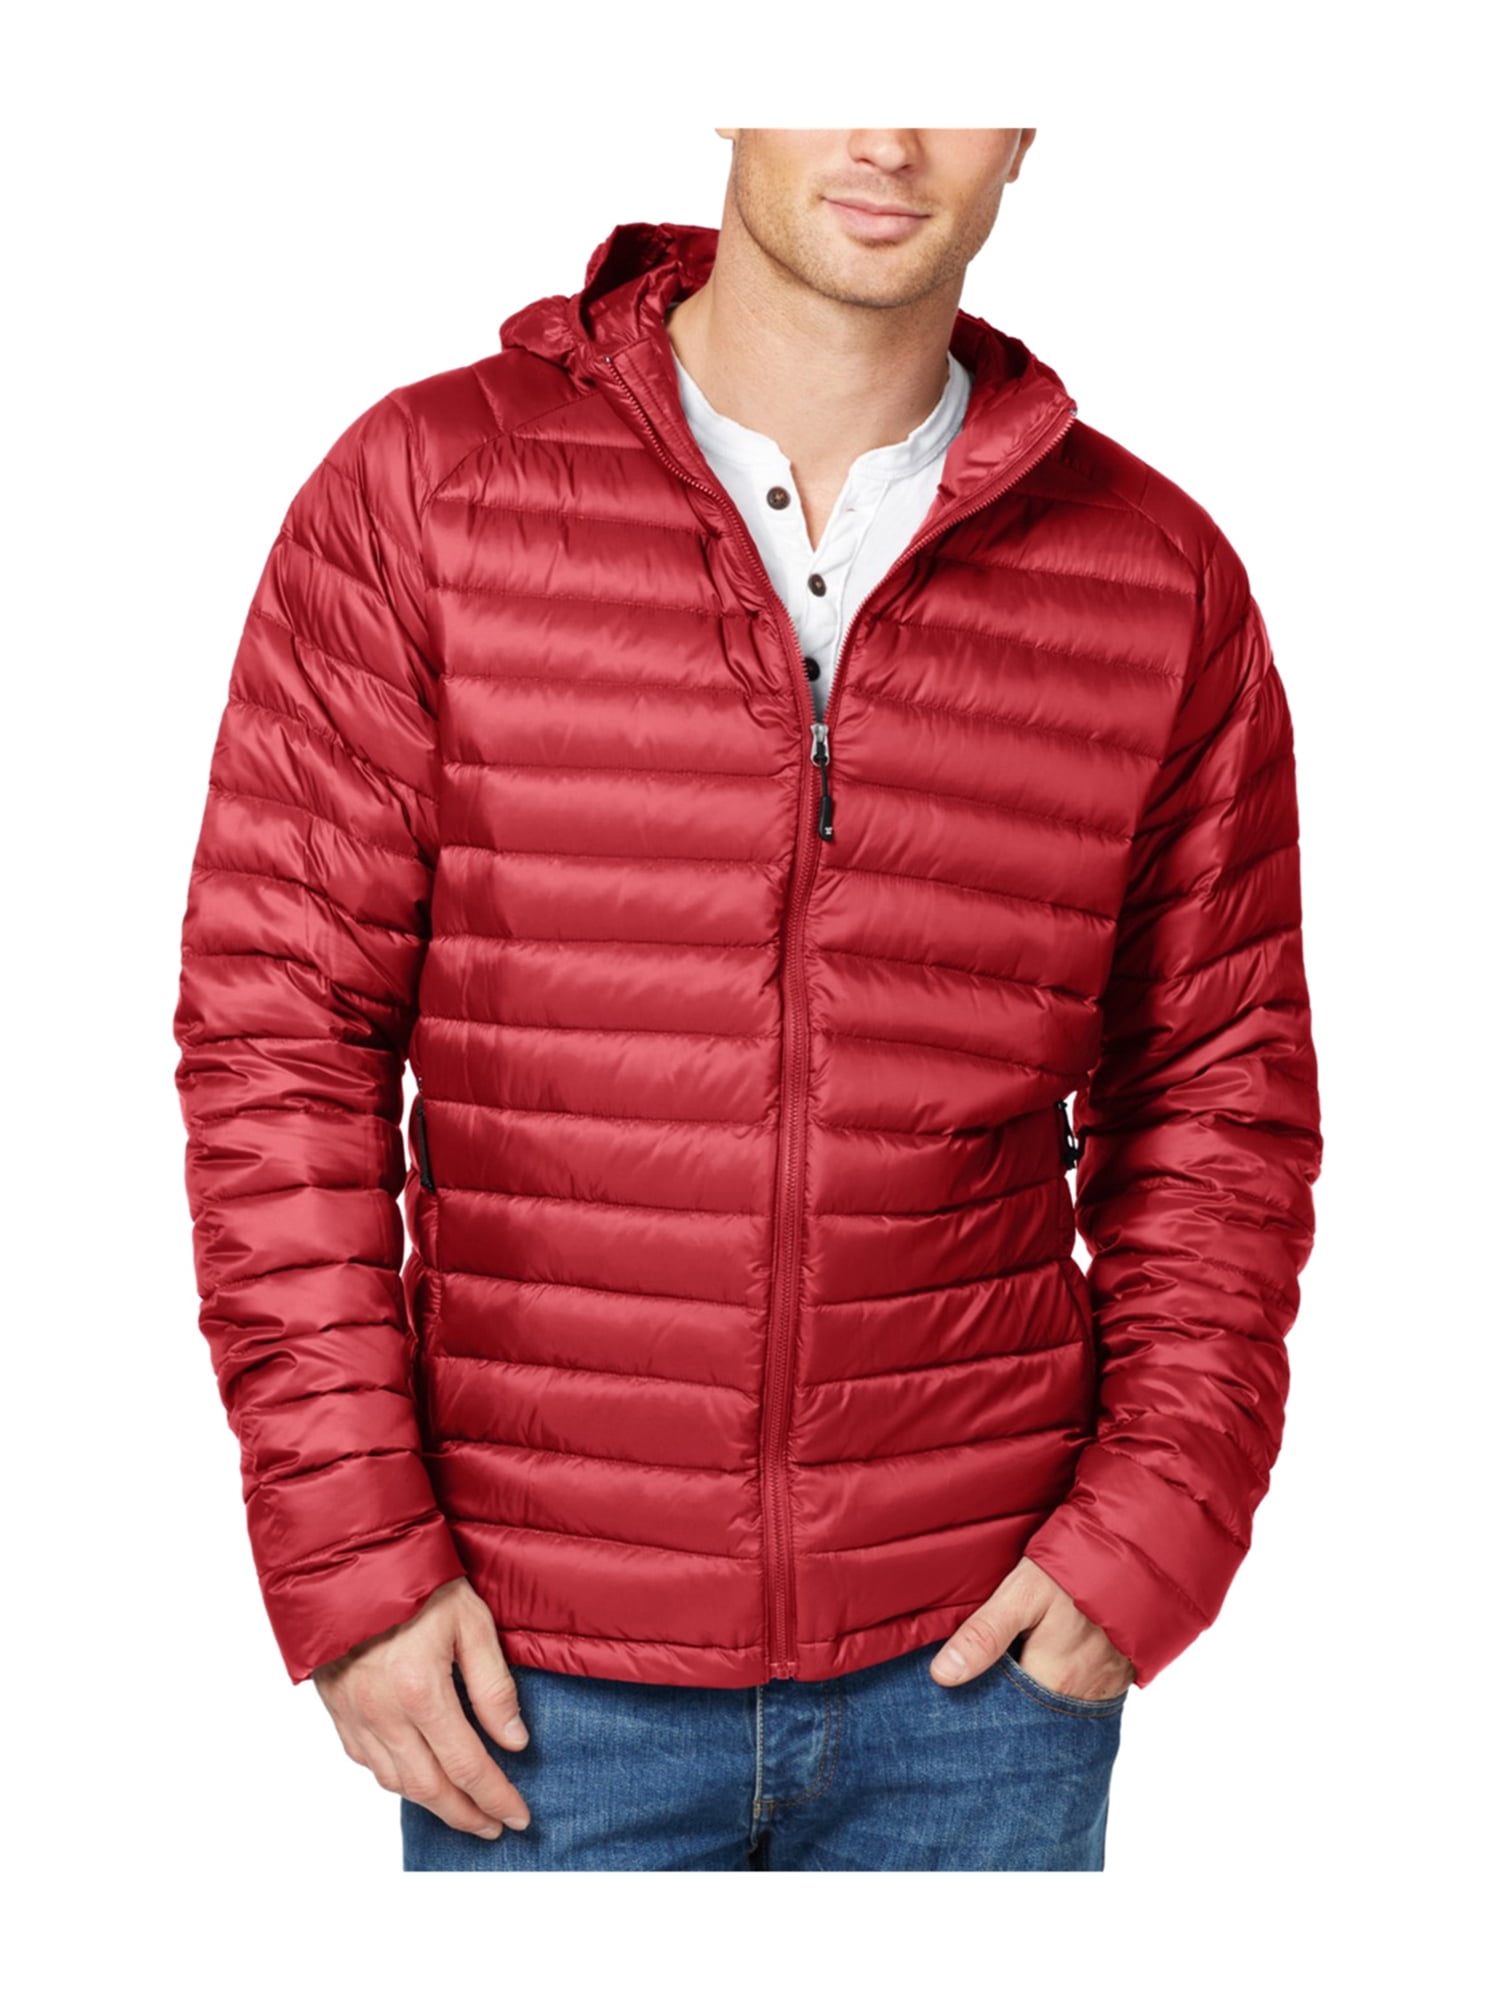 Weatherproof Mens Packable Down Quilted Jacket red 2XL | Walmart Canada